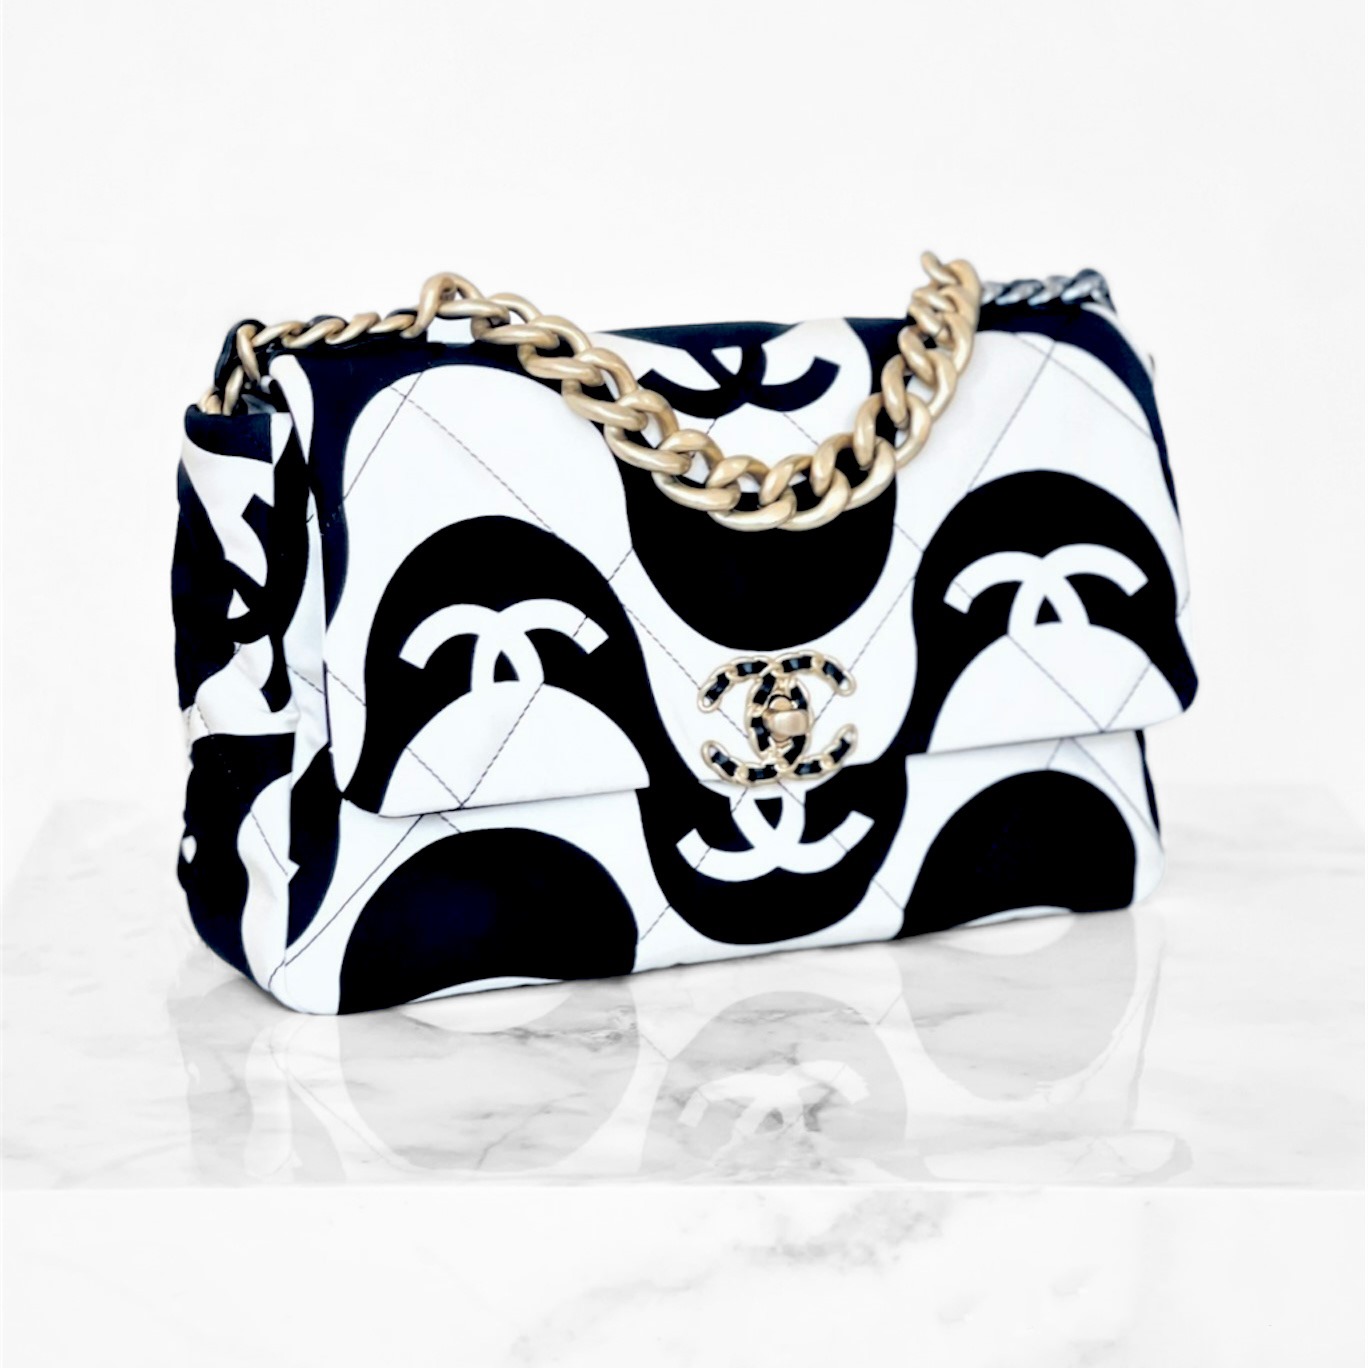 chanel 19 flap bag black and white